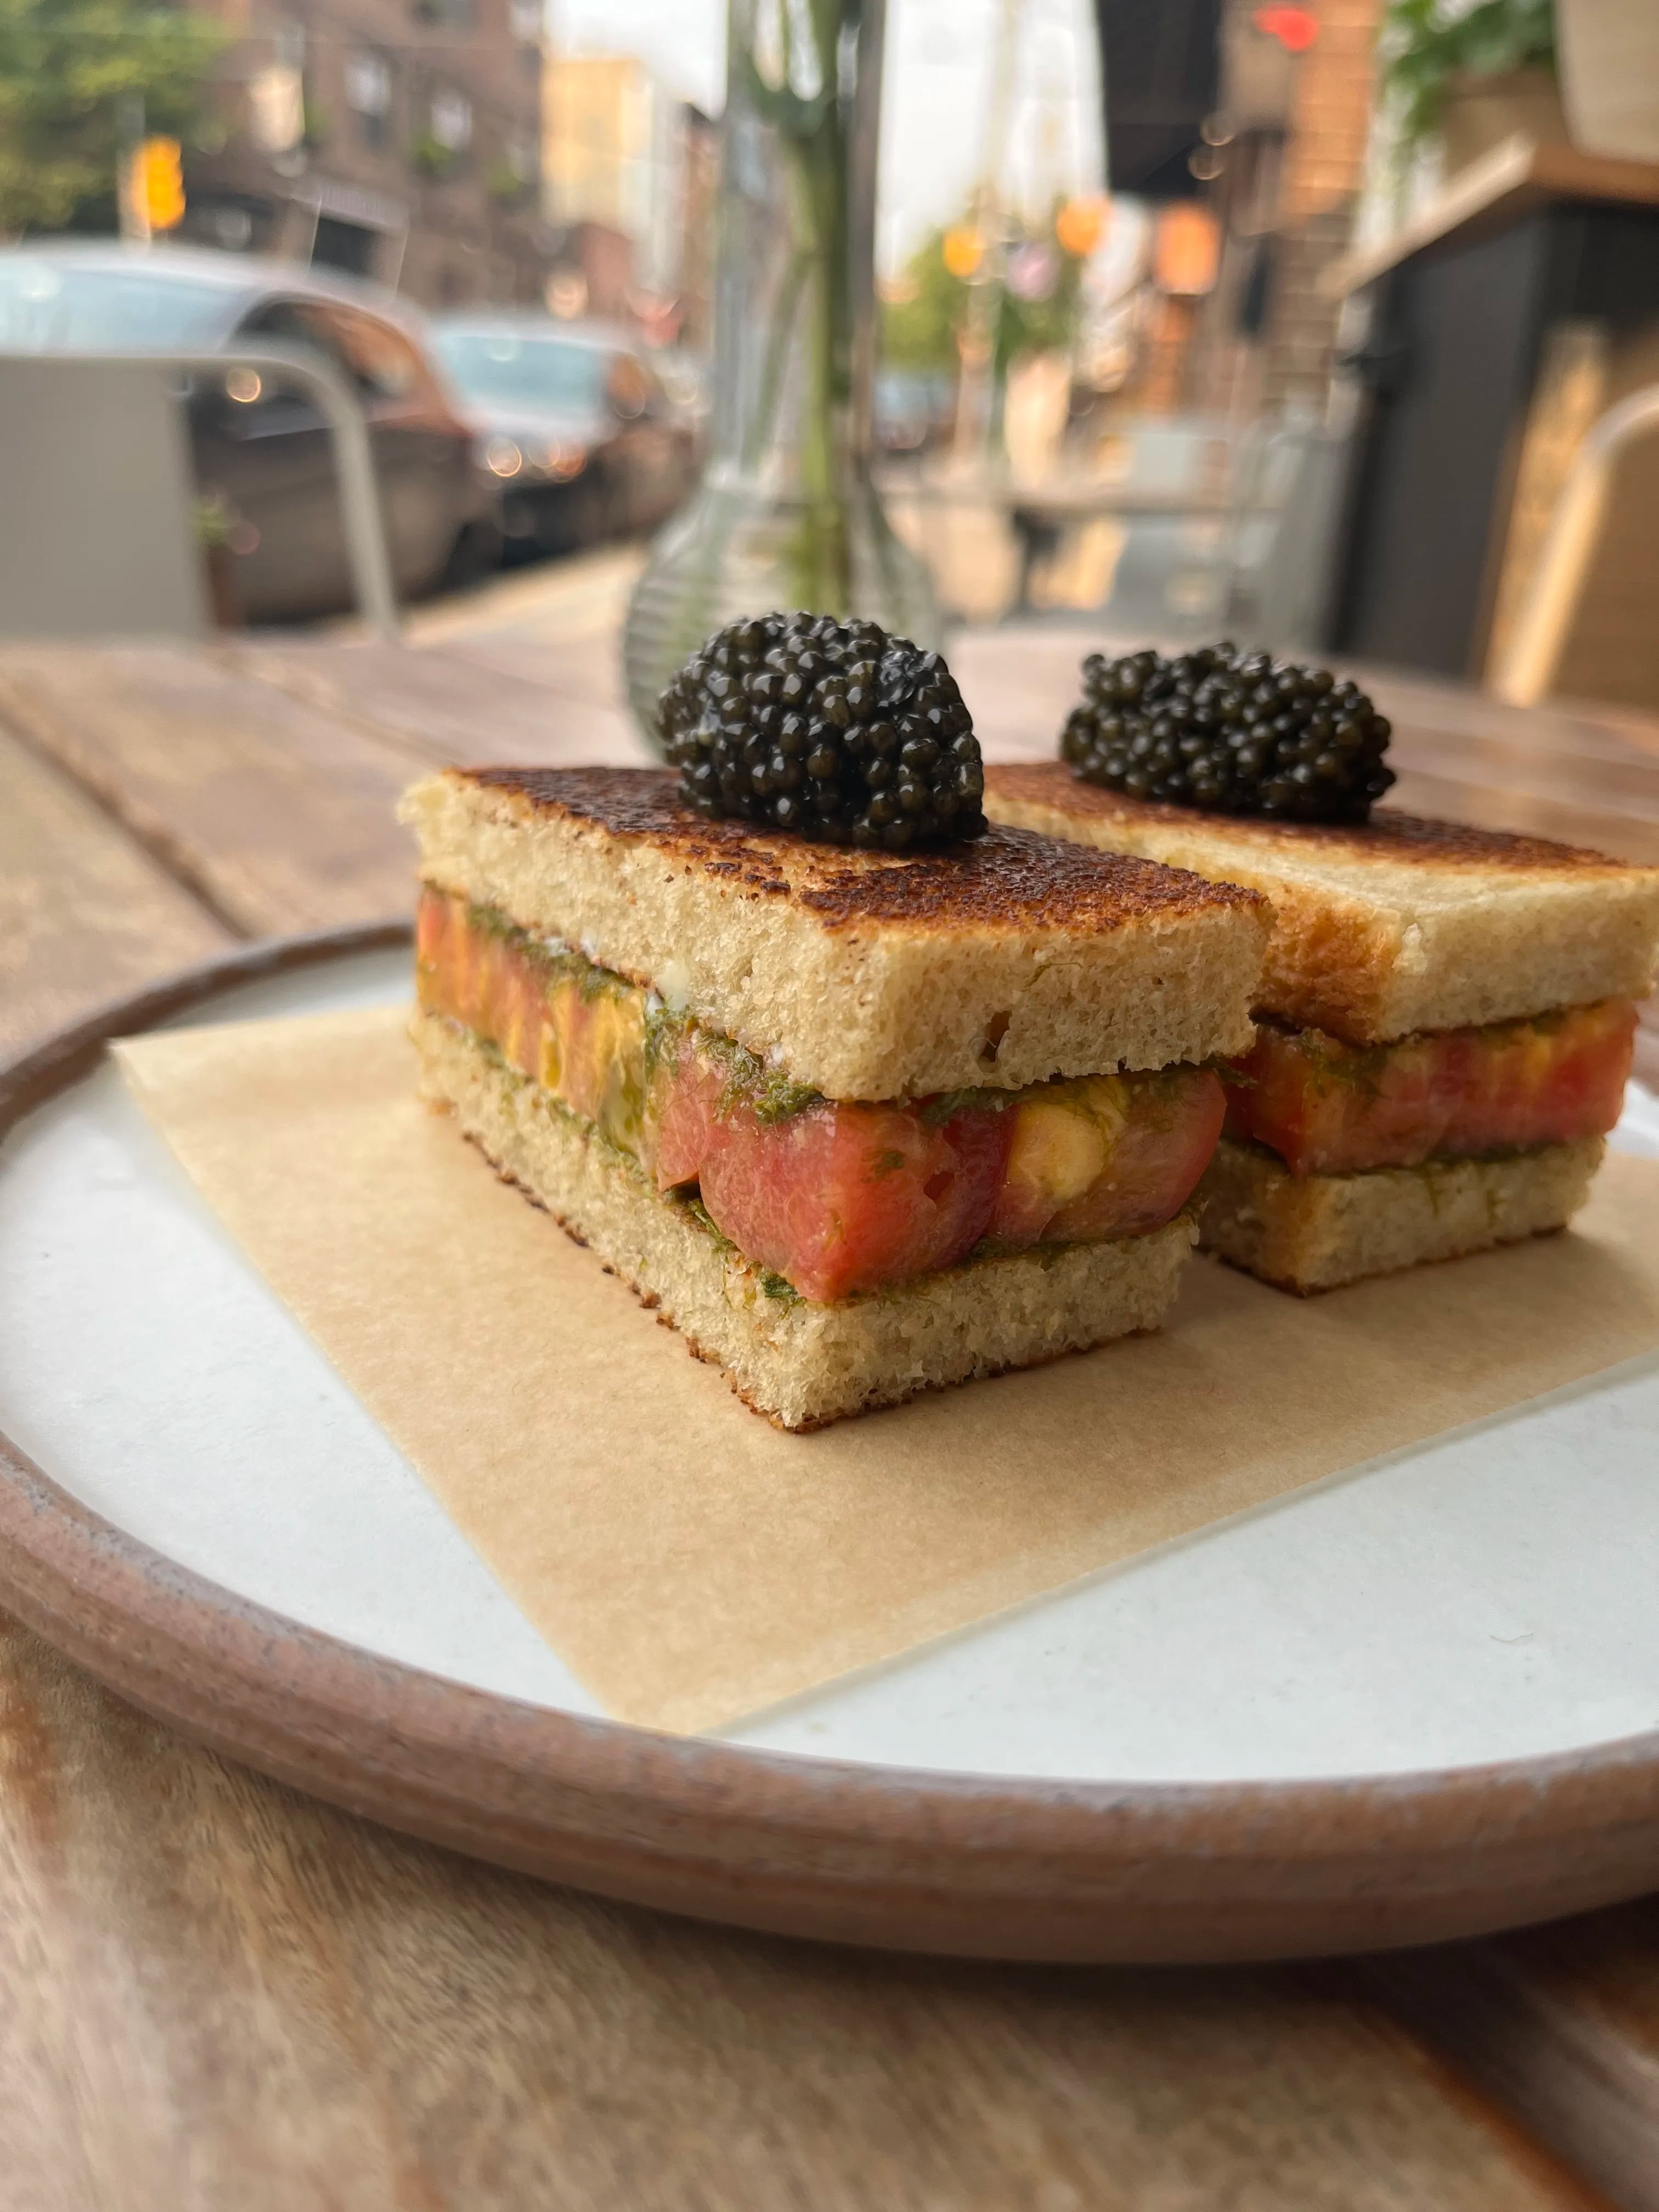 At River Twice on East Passyunk Avenue, caviar goes on top of the tomato sandwich.